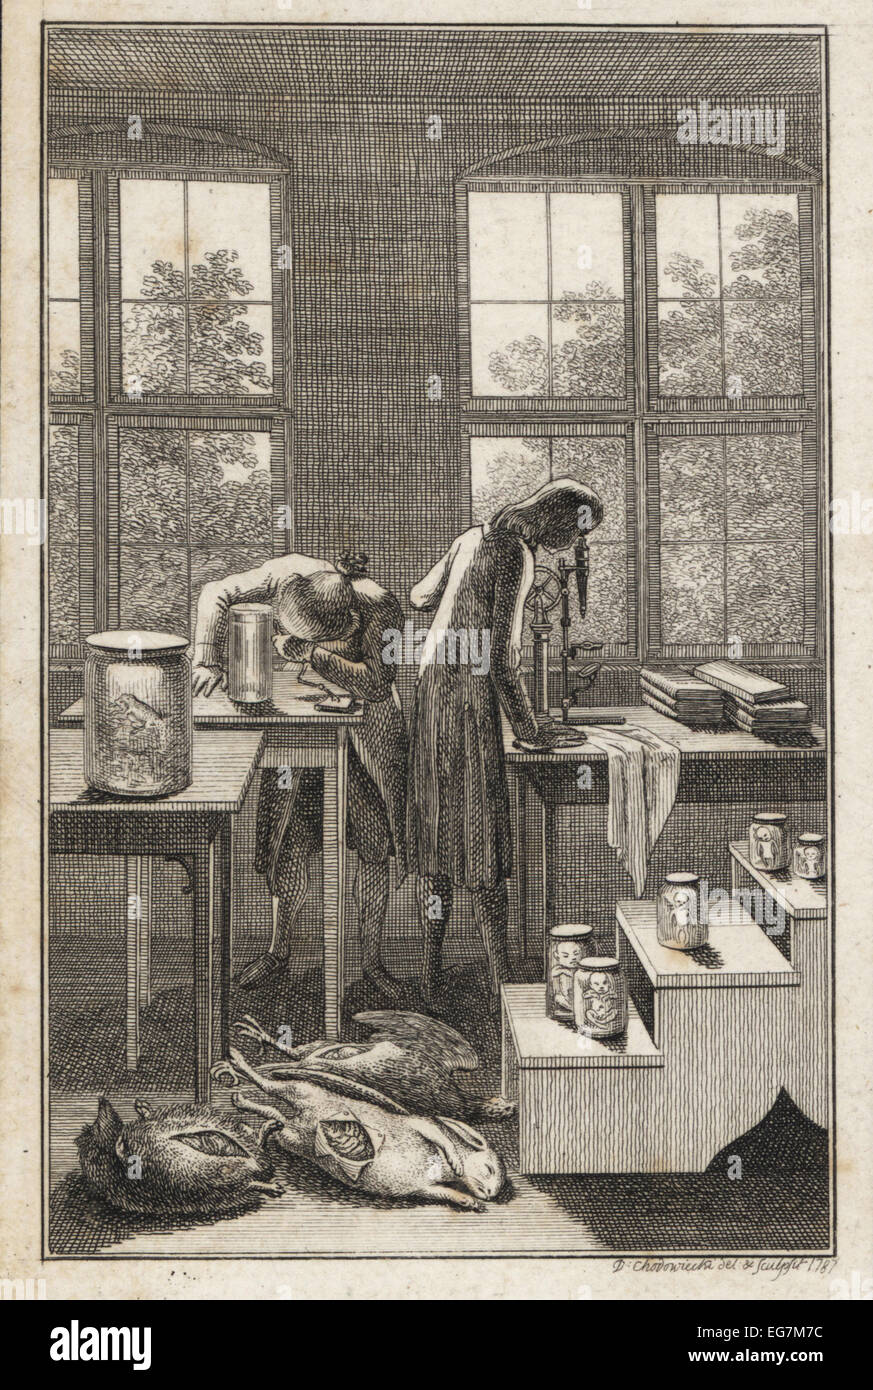 18th century scientists in a lab examining specimens in jars. Stock Photo